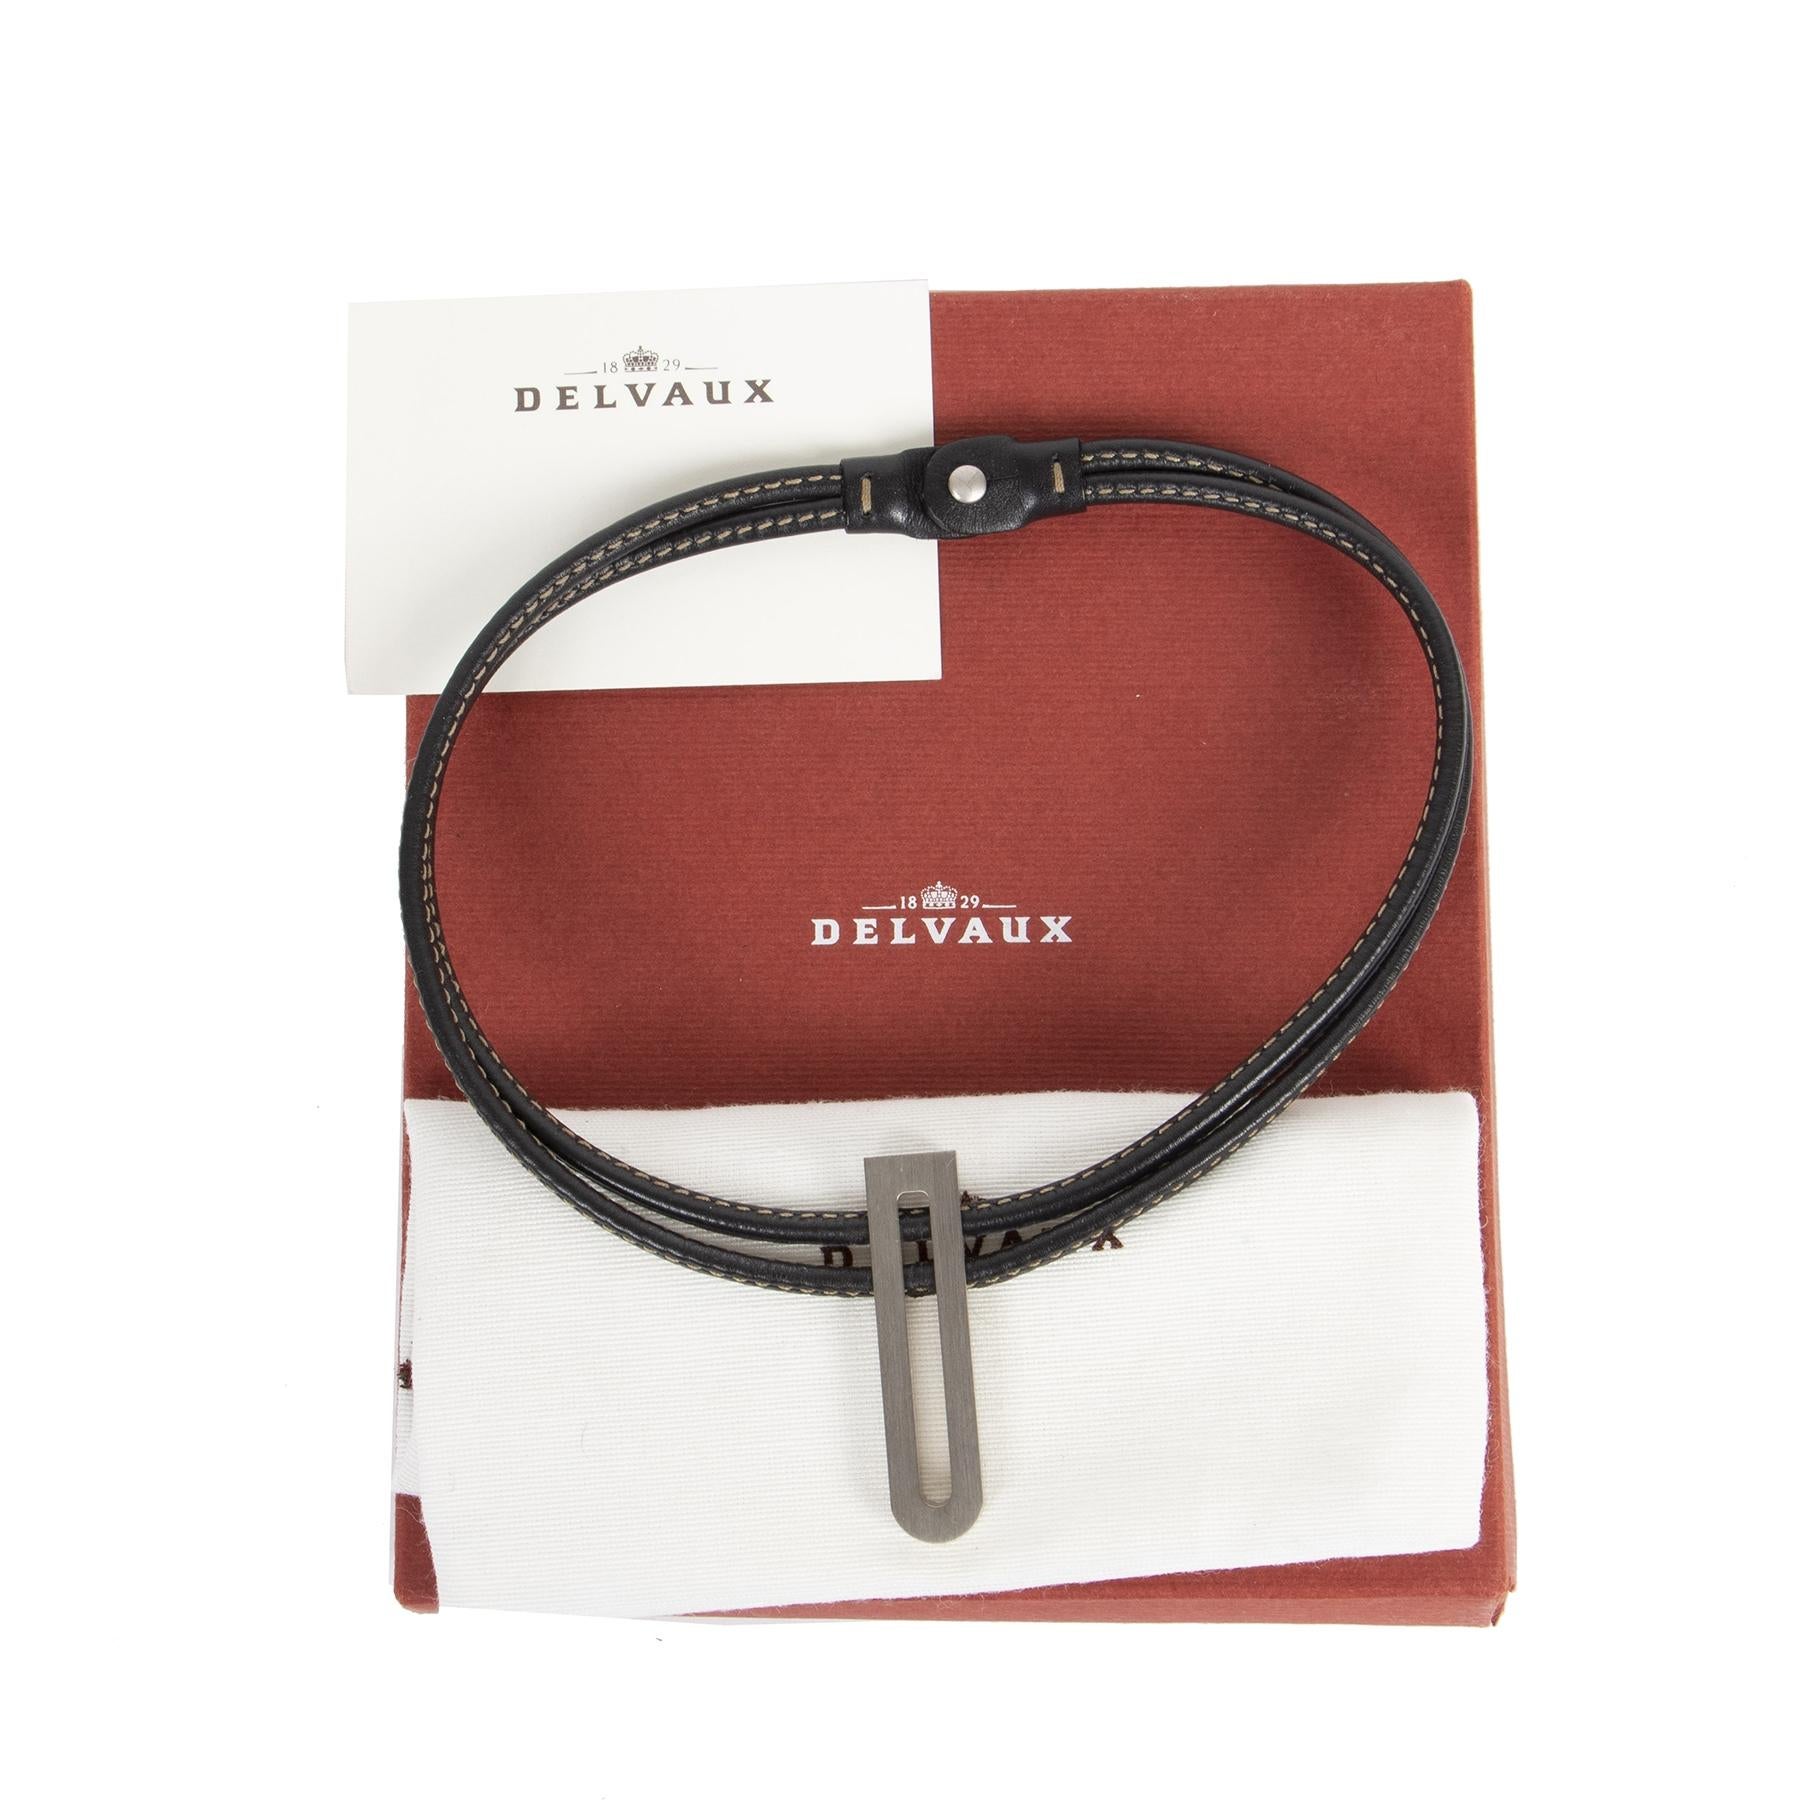 Very good preloved condition

Delvaux Black Leather Necklace Silver D

This amazing Delvaux black leather necklace is the perfect accessory. It can be worn whether you attend a party or go to work.

The silver tone 